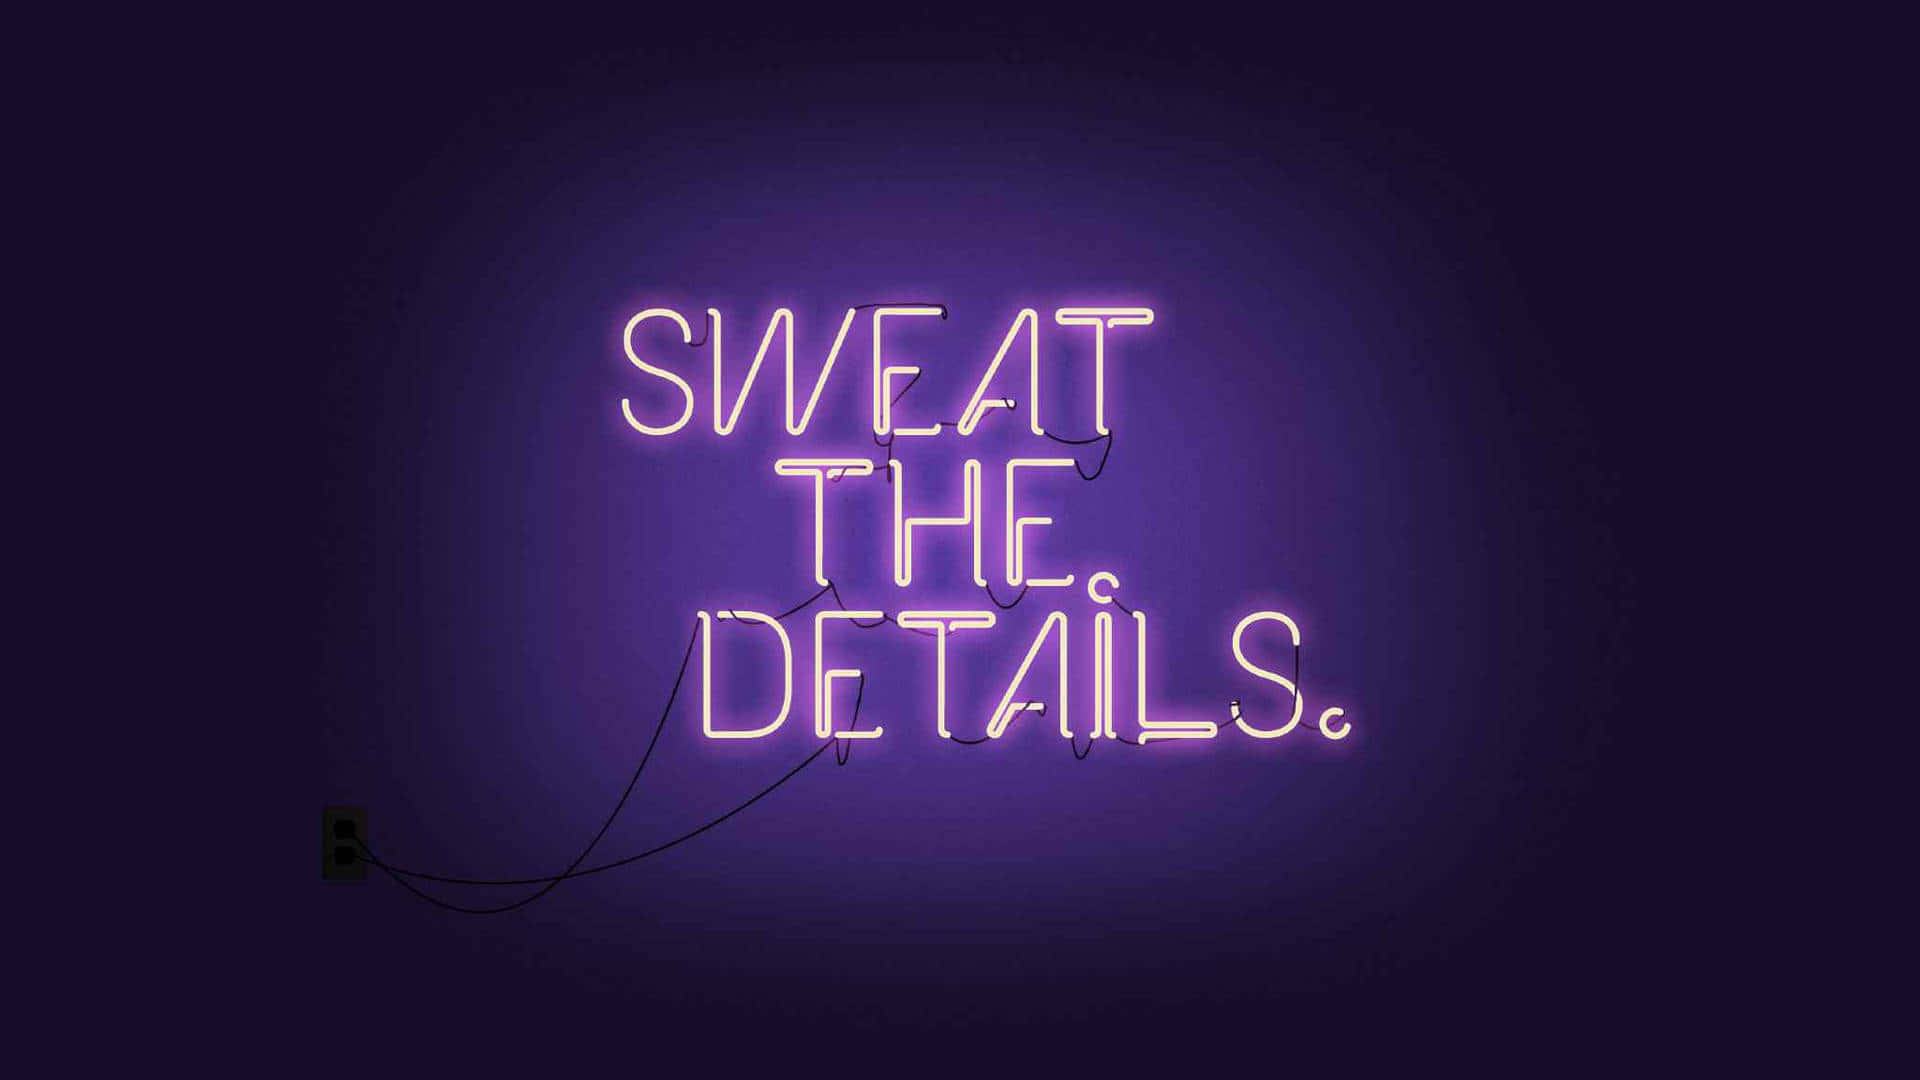 Sweat The Details Neon Sign Wallpaper